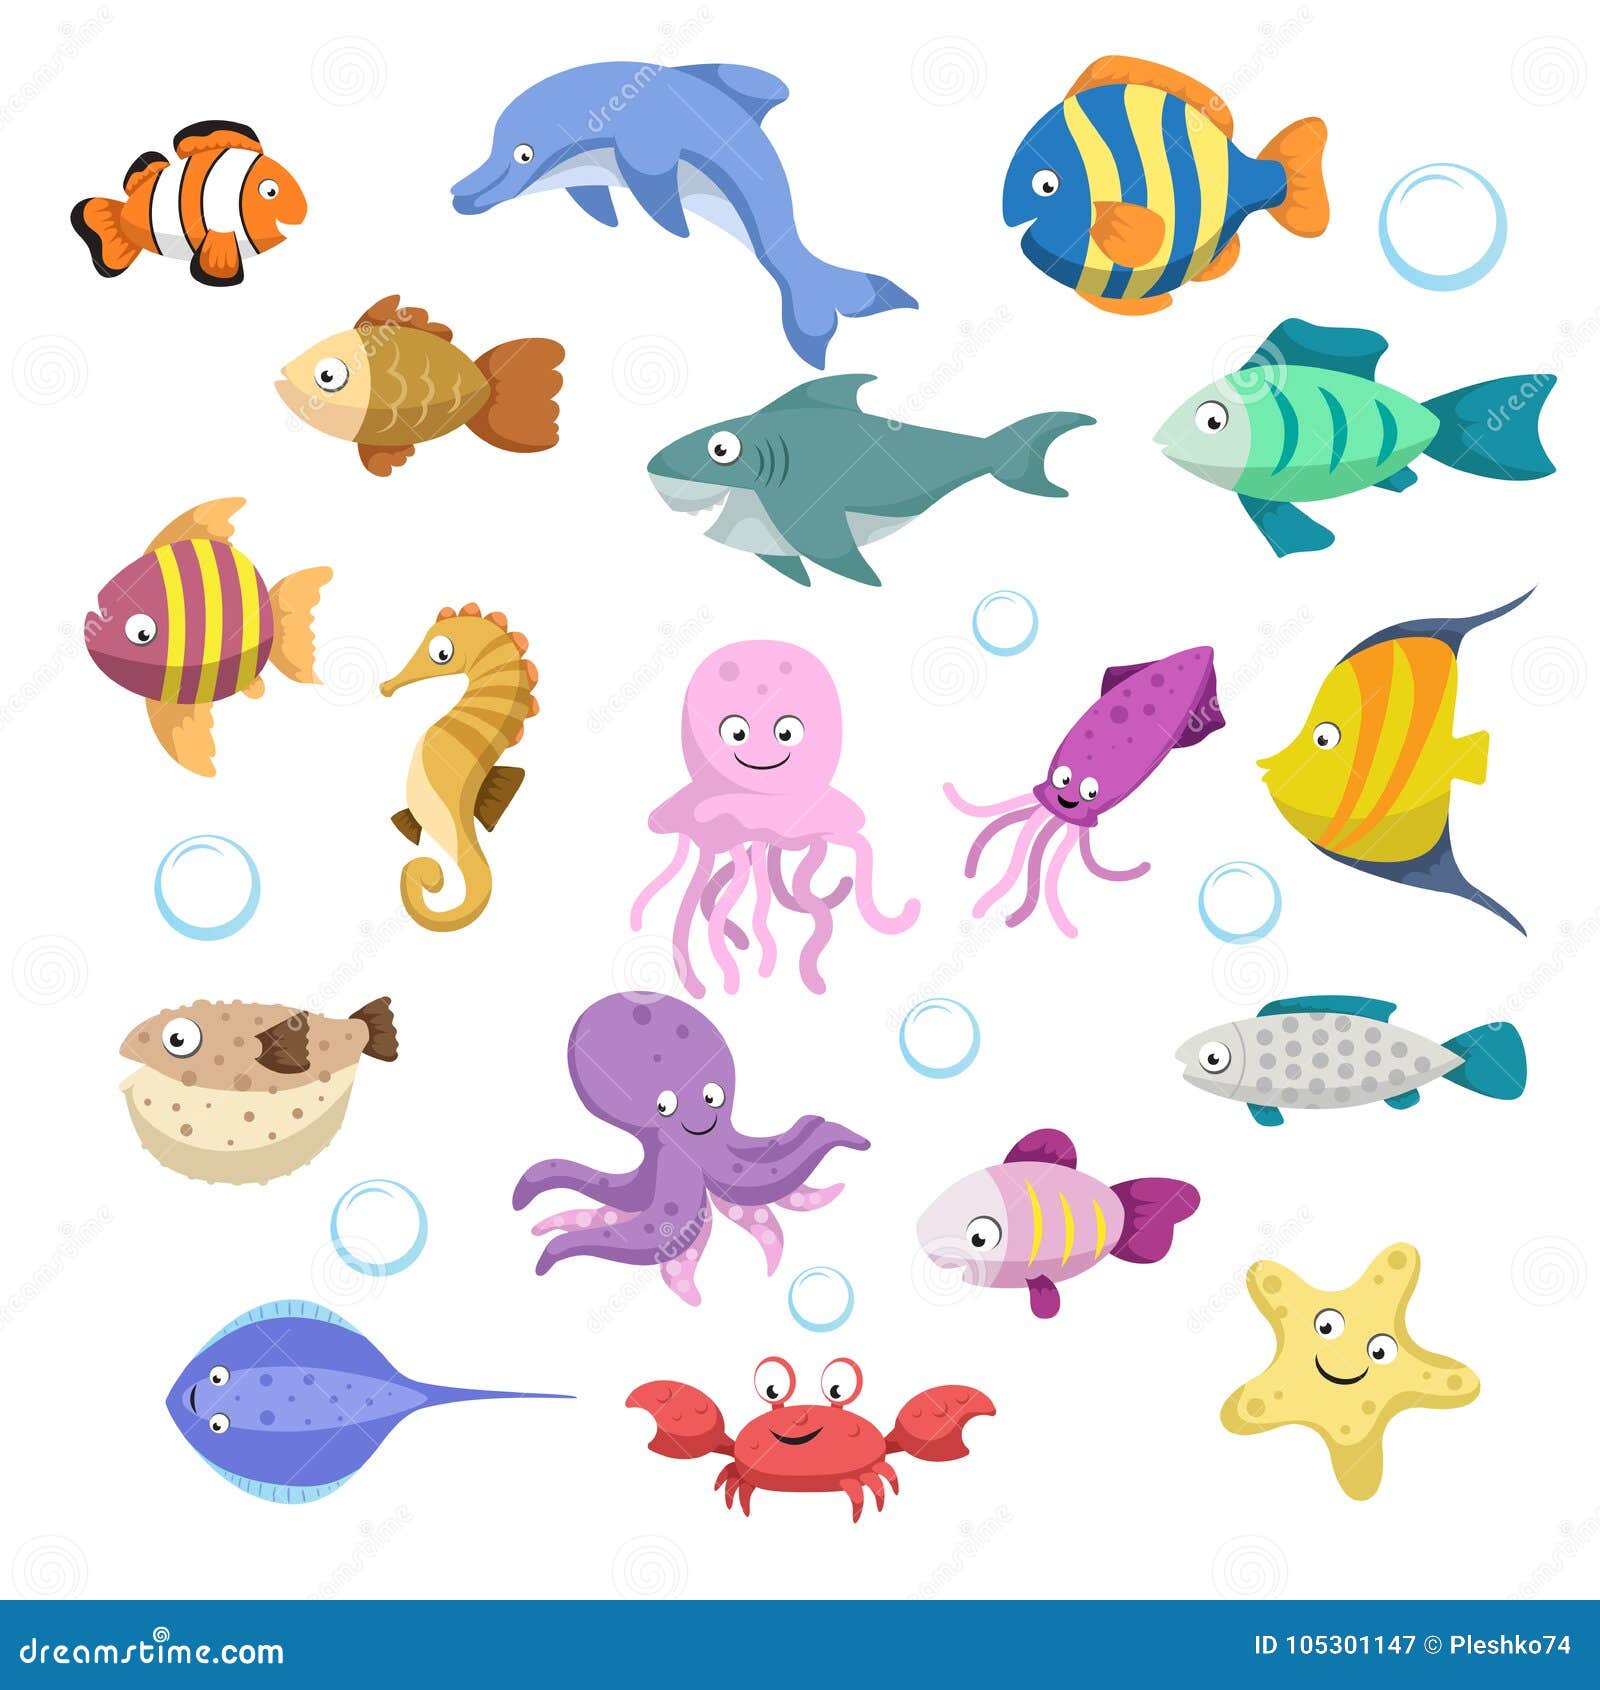 cartoon trendy colorful reef animals big set. fishes, mammal, crustaceans. dolphin and shark, octopus, crab, starfish, jellyfish.